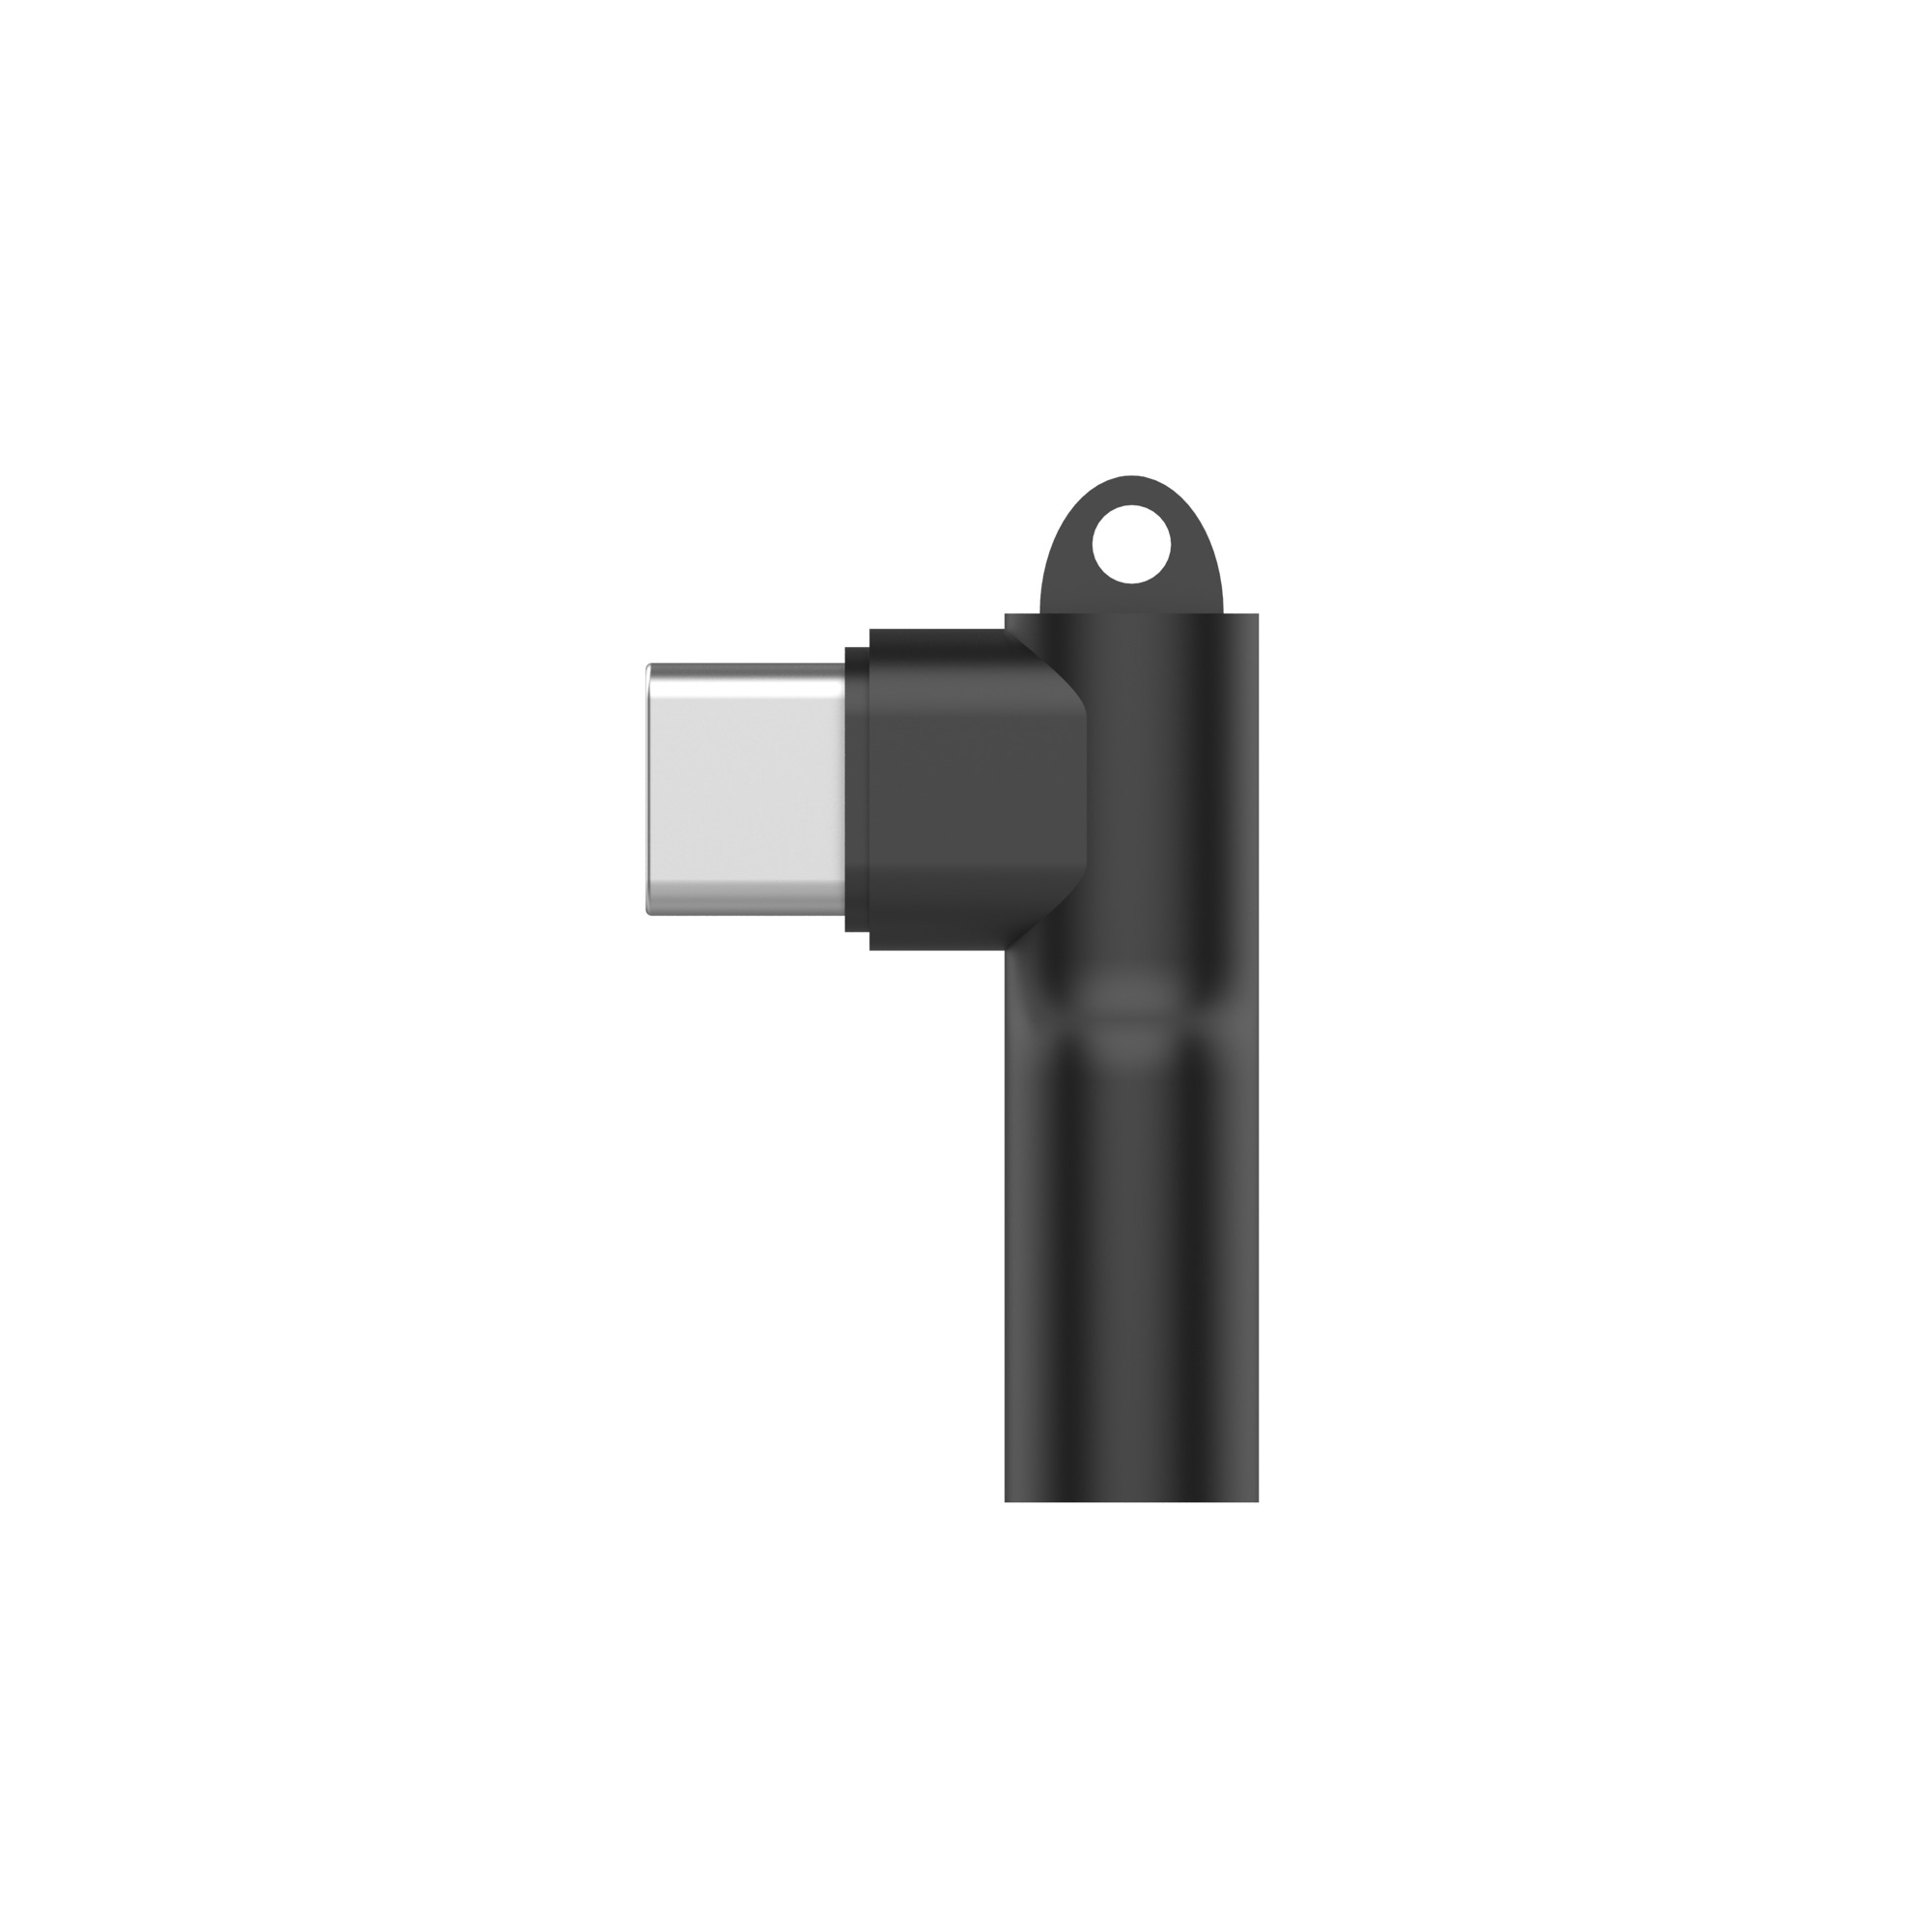 USB C to 3.5mm audio adapter